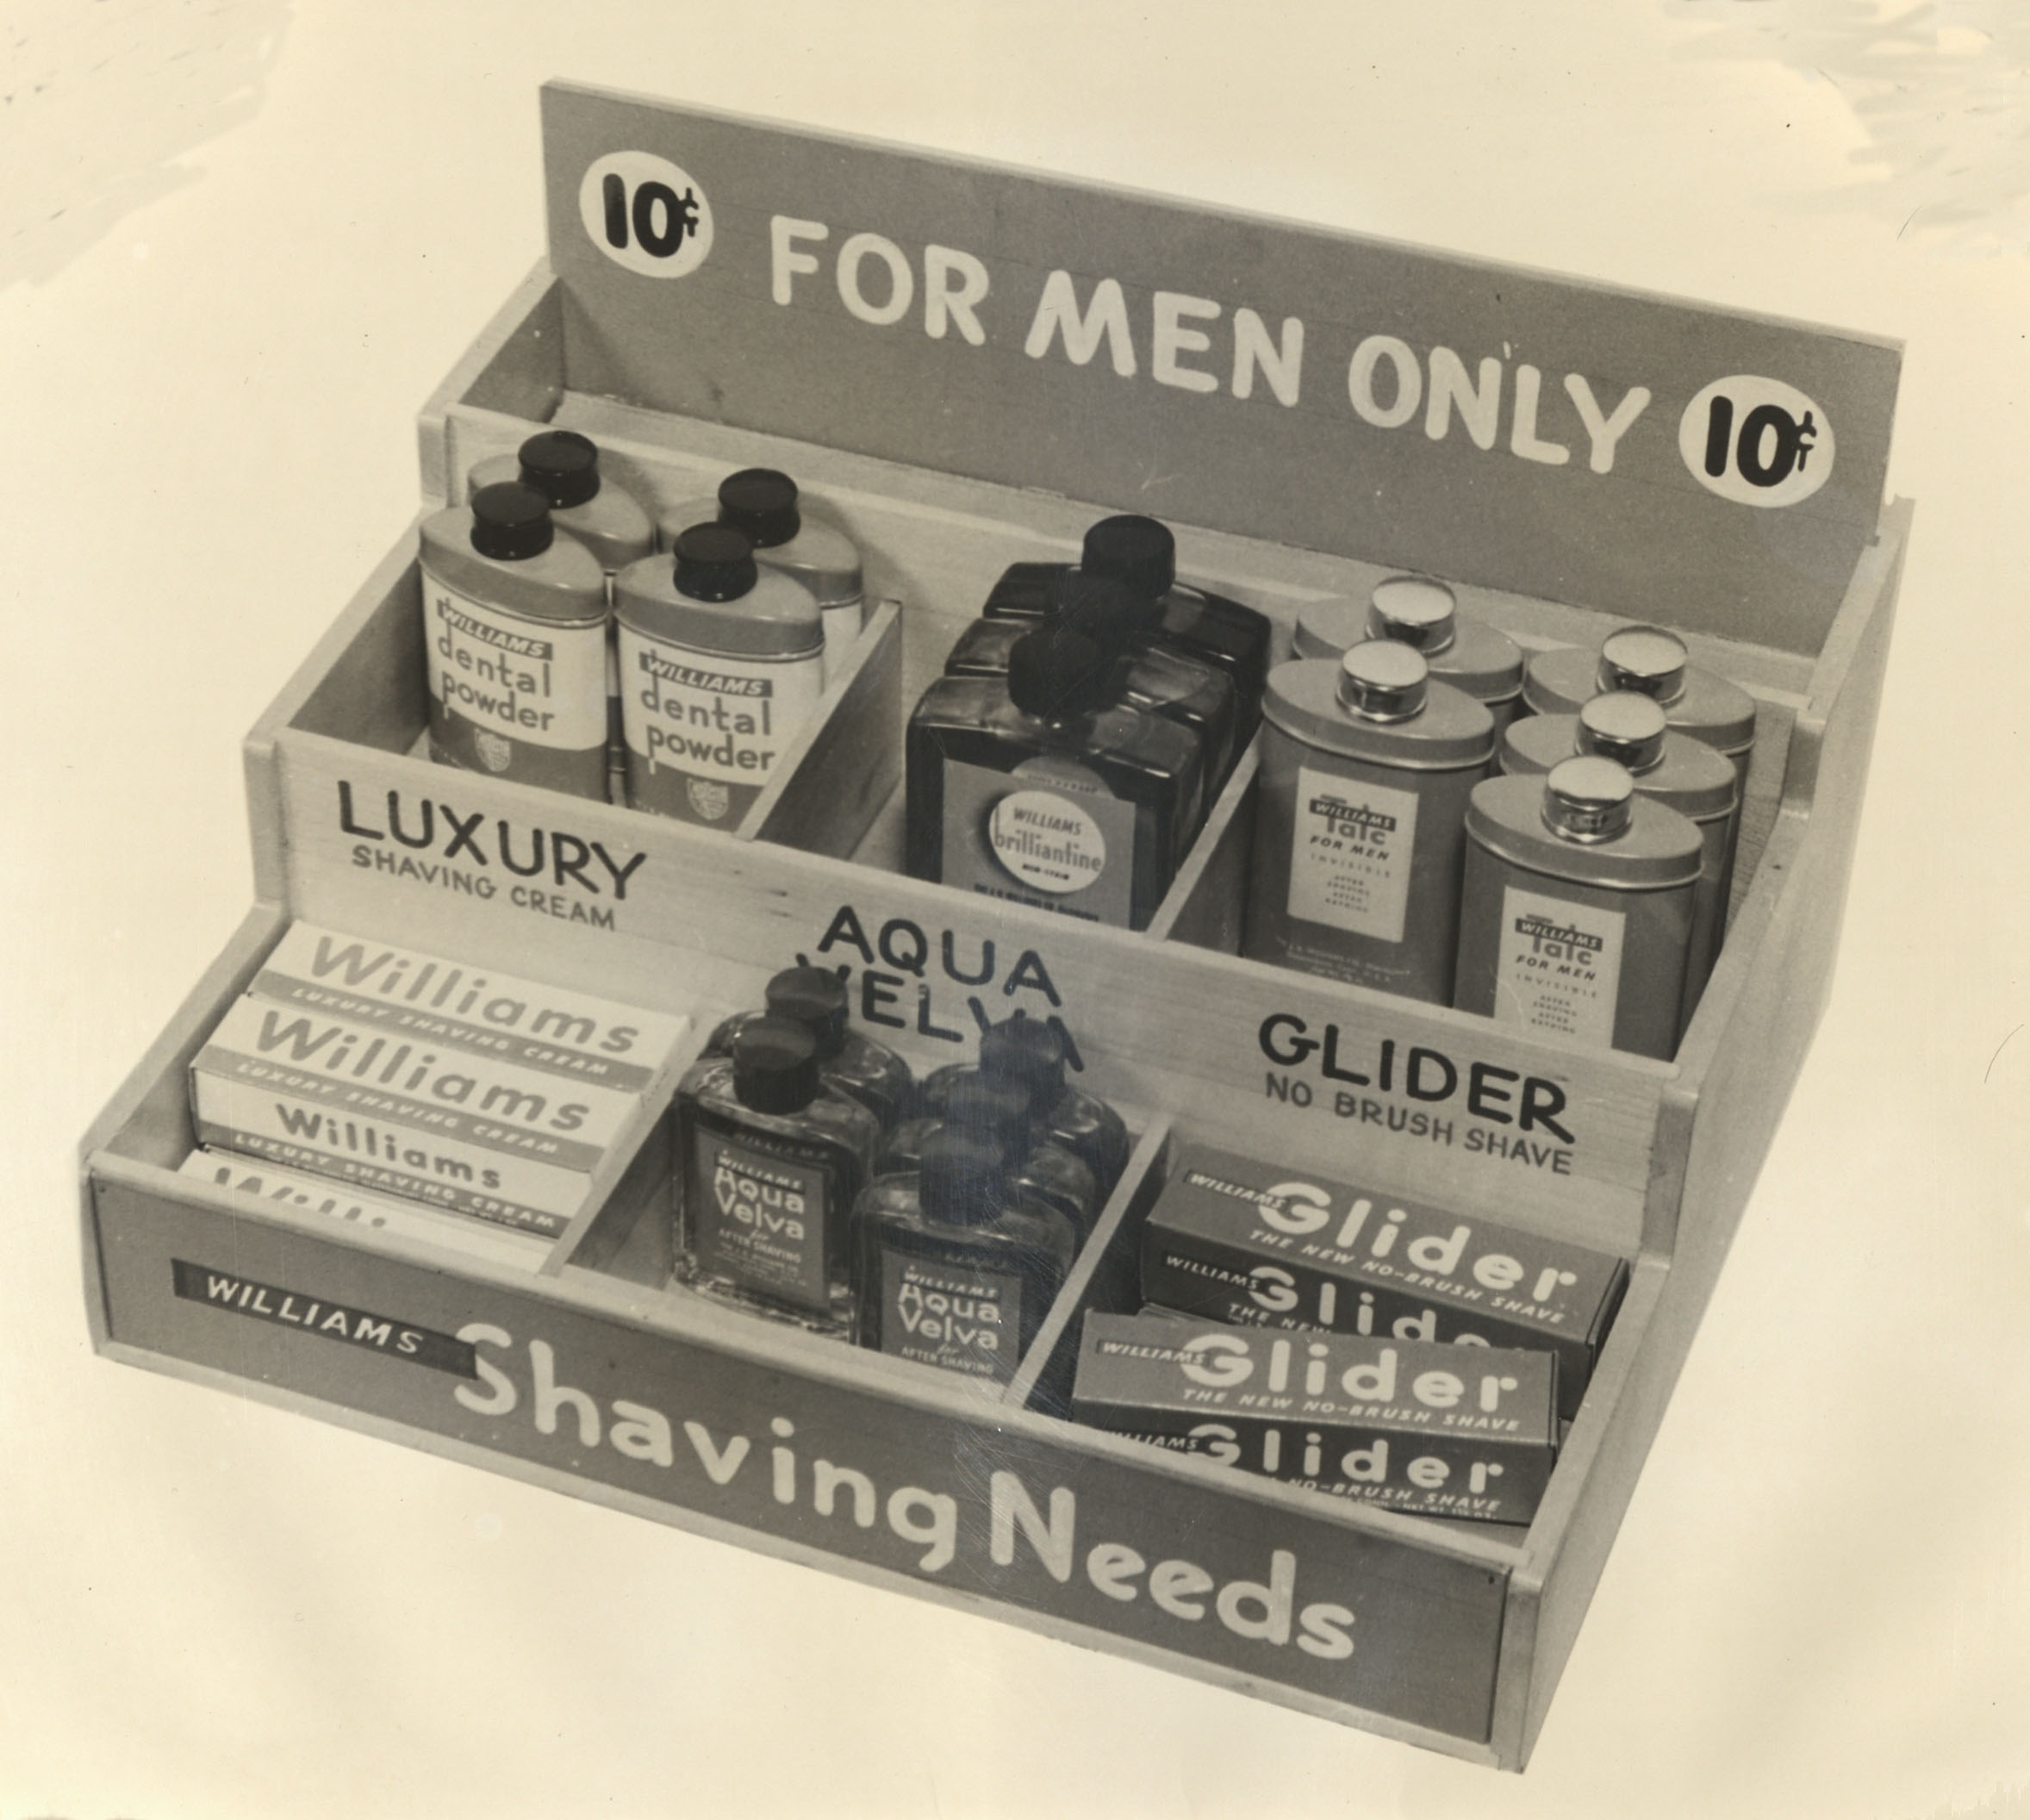 Display of "For Men Only" shaving products, manufactured by the J.B. Williams Company